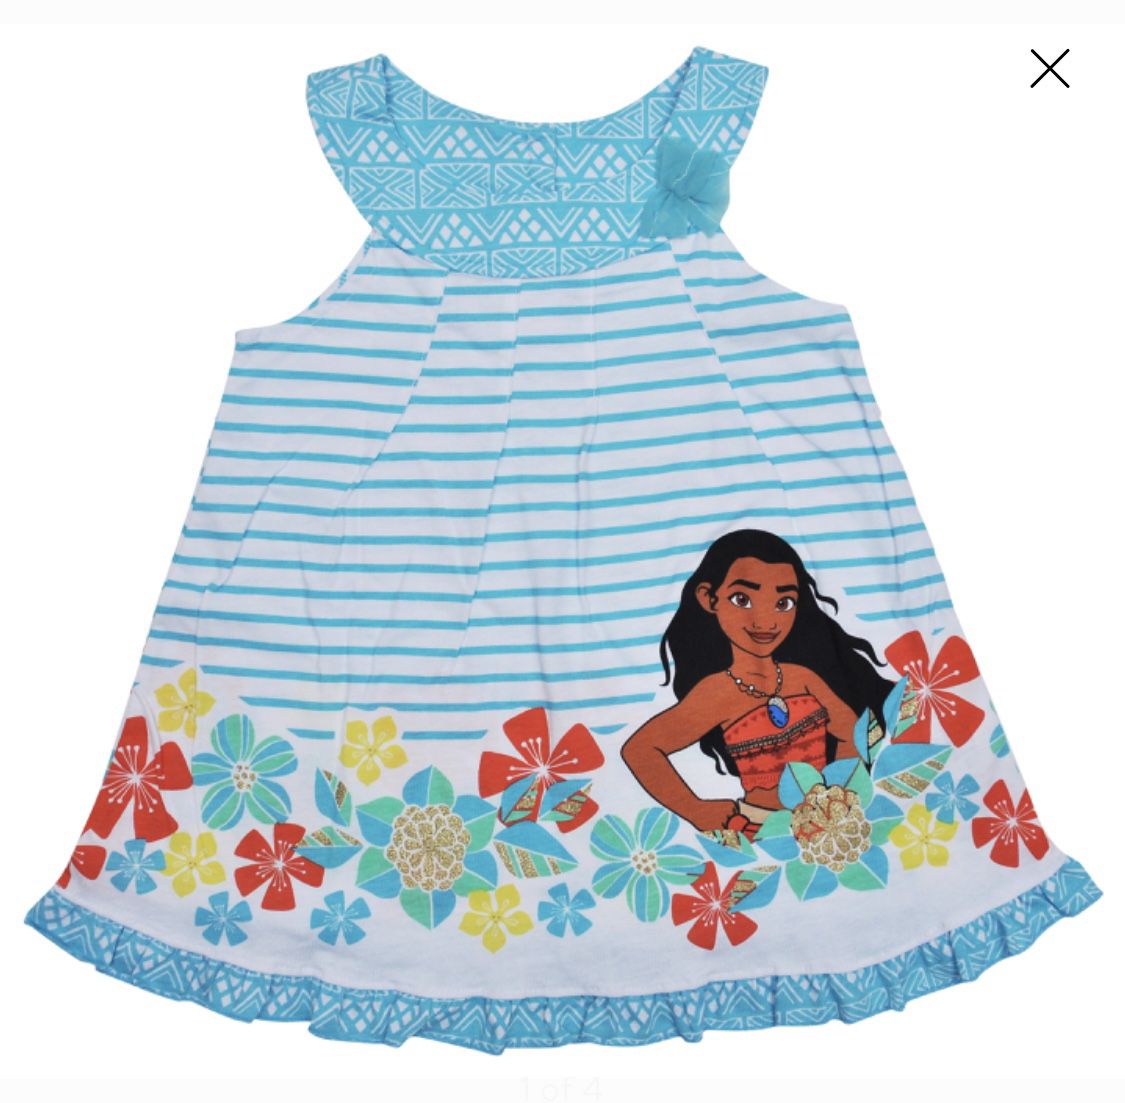 New with tags! Disney Moana Girls dress- sizes 5 & 6 available- retails for $19